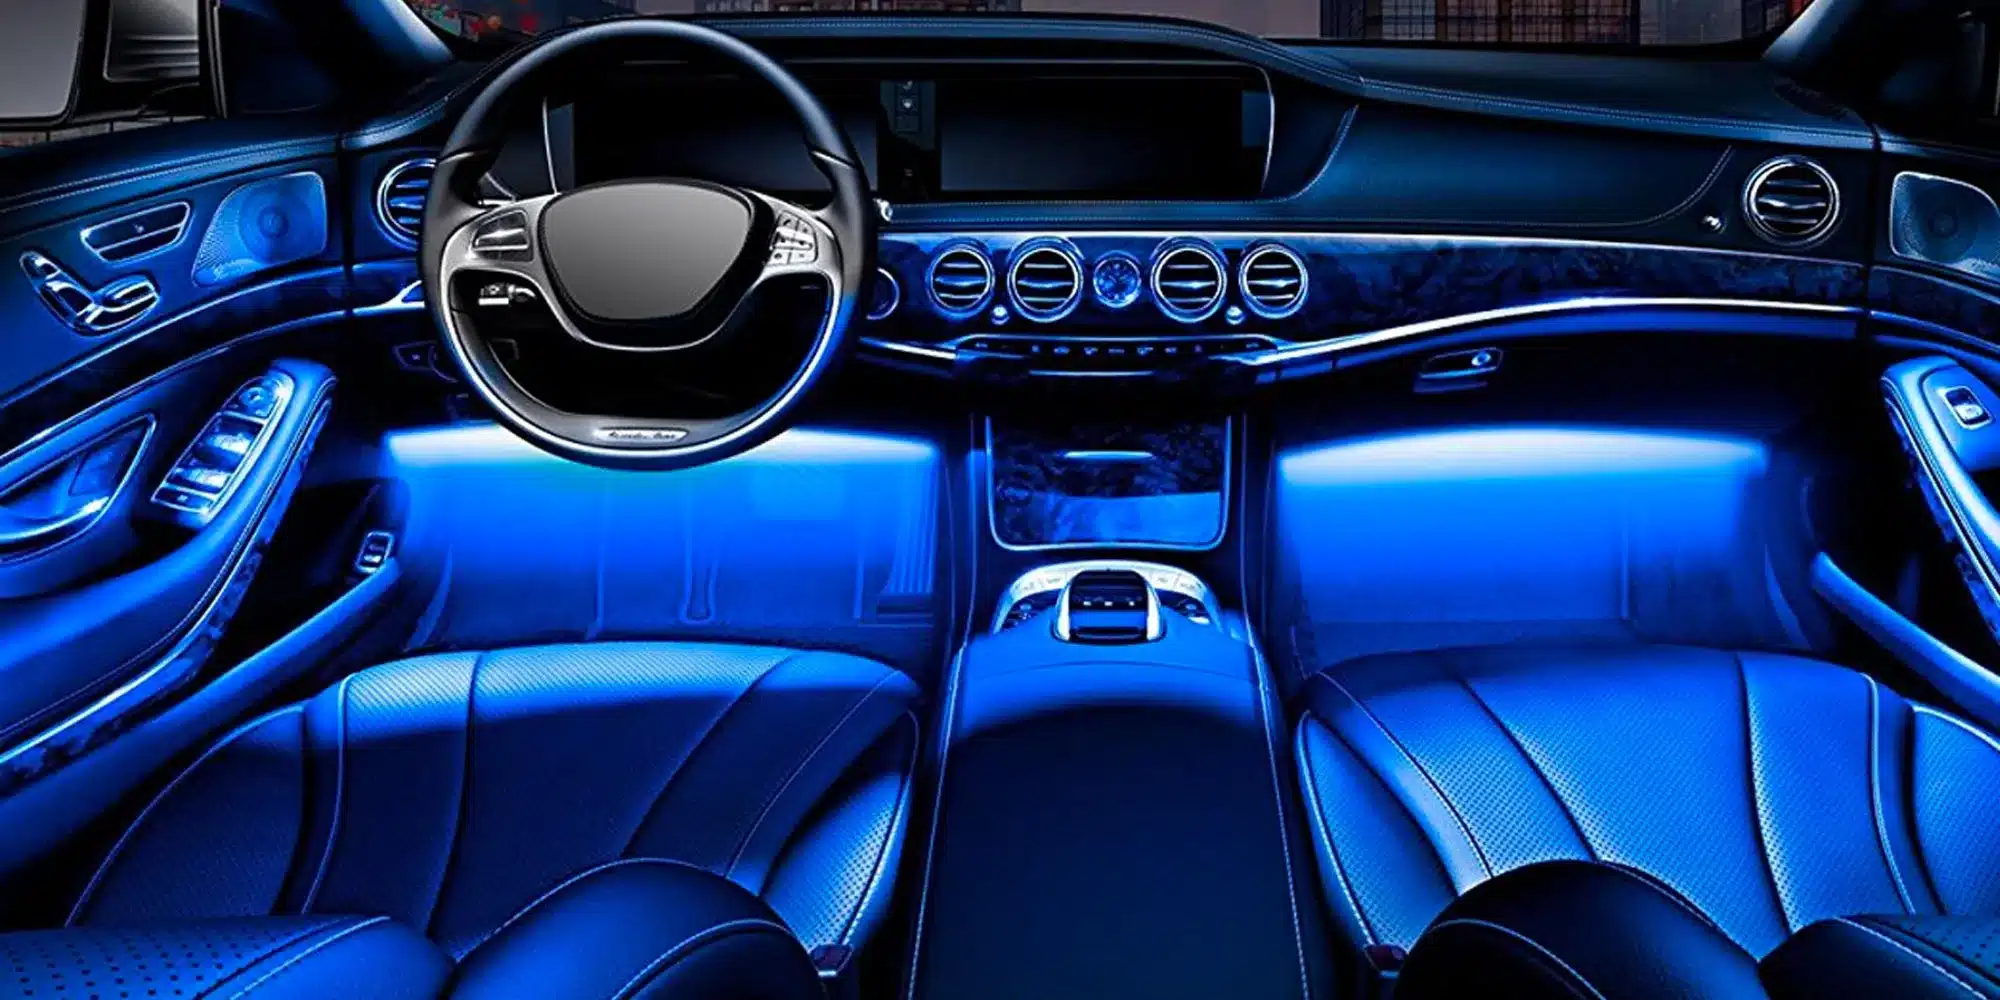 How To Install LED Lights In Car Interior